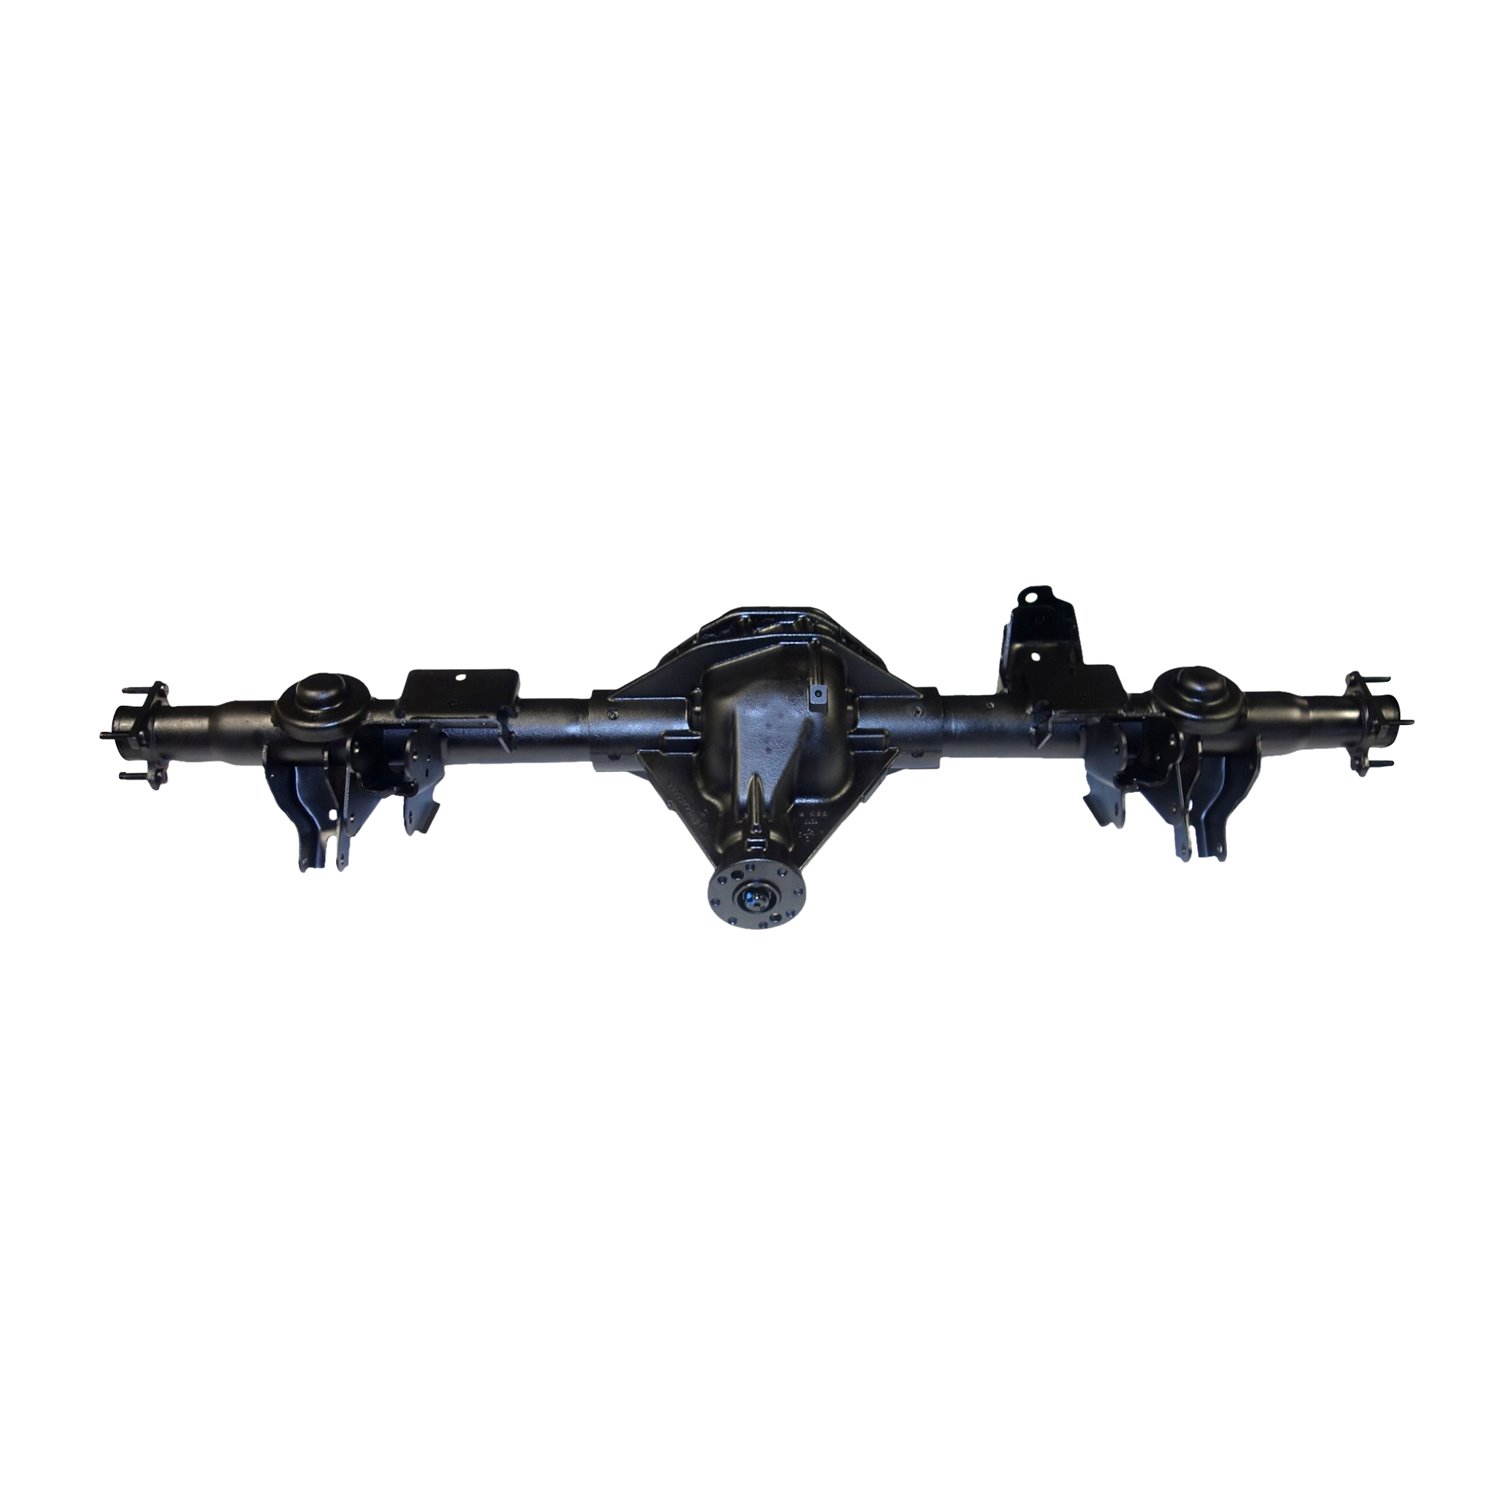 Remanufactured Complete Axle Assembly for Chrysler 9.25ZF 2011 Dodge Ram 1500 3.55 Ratio